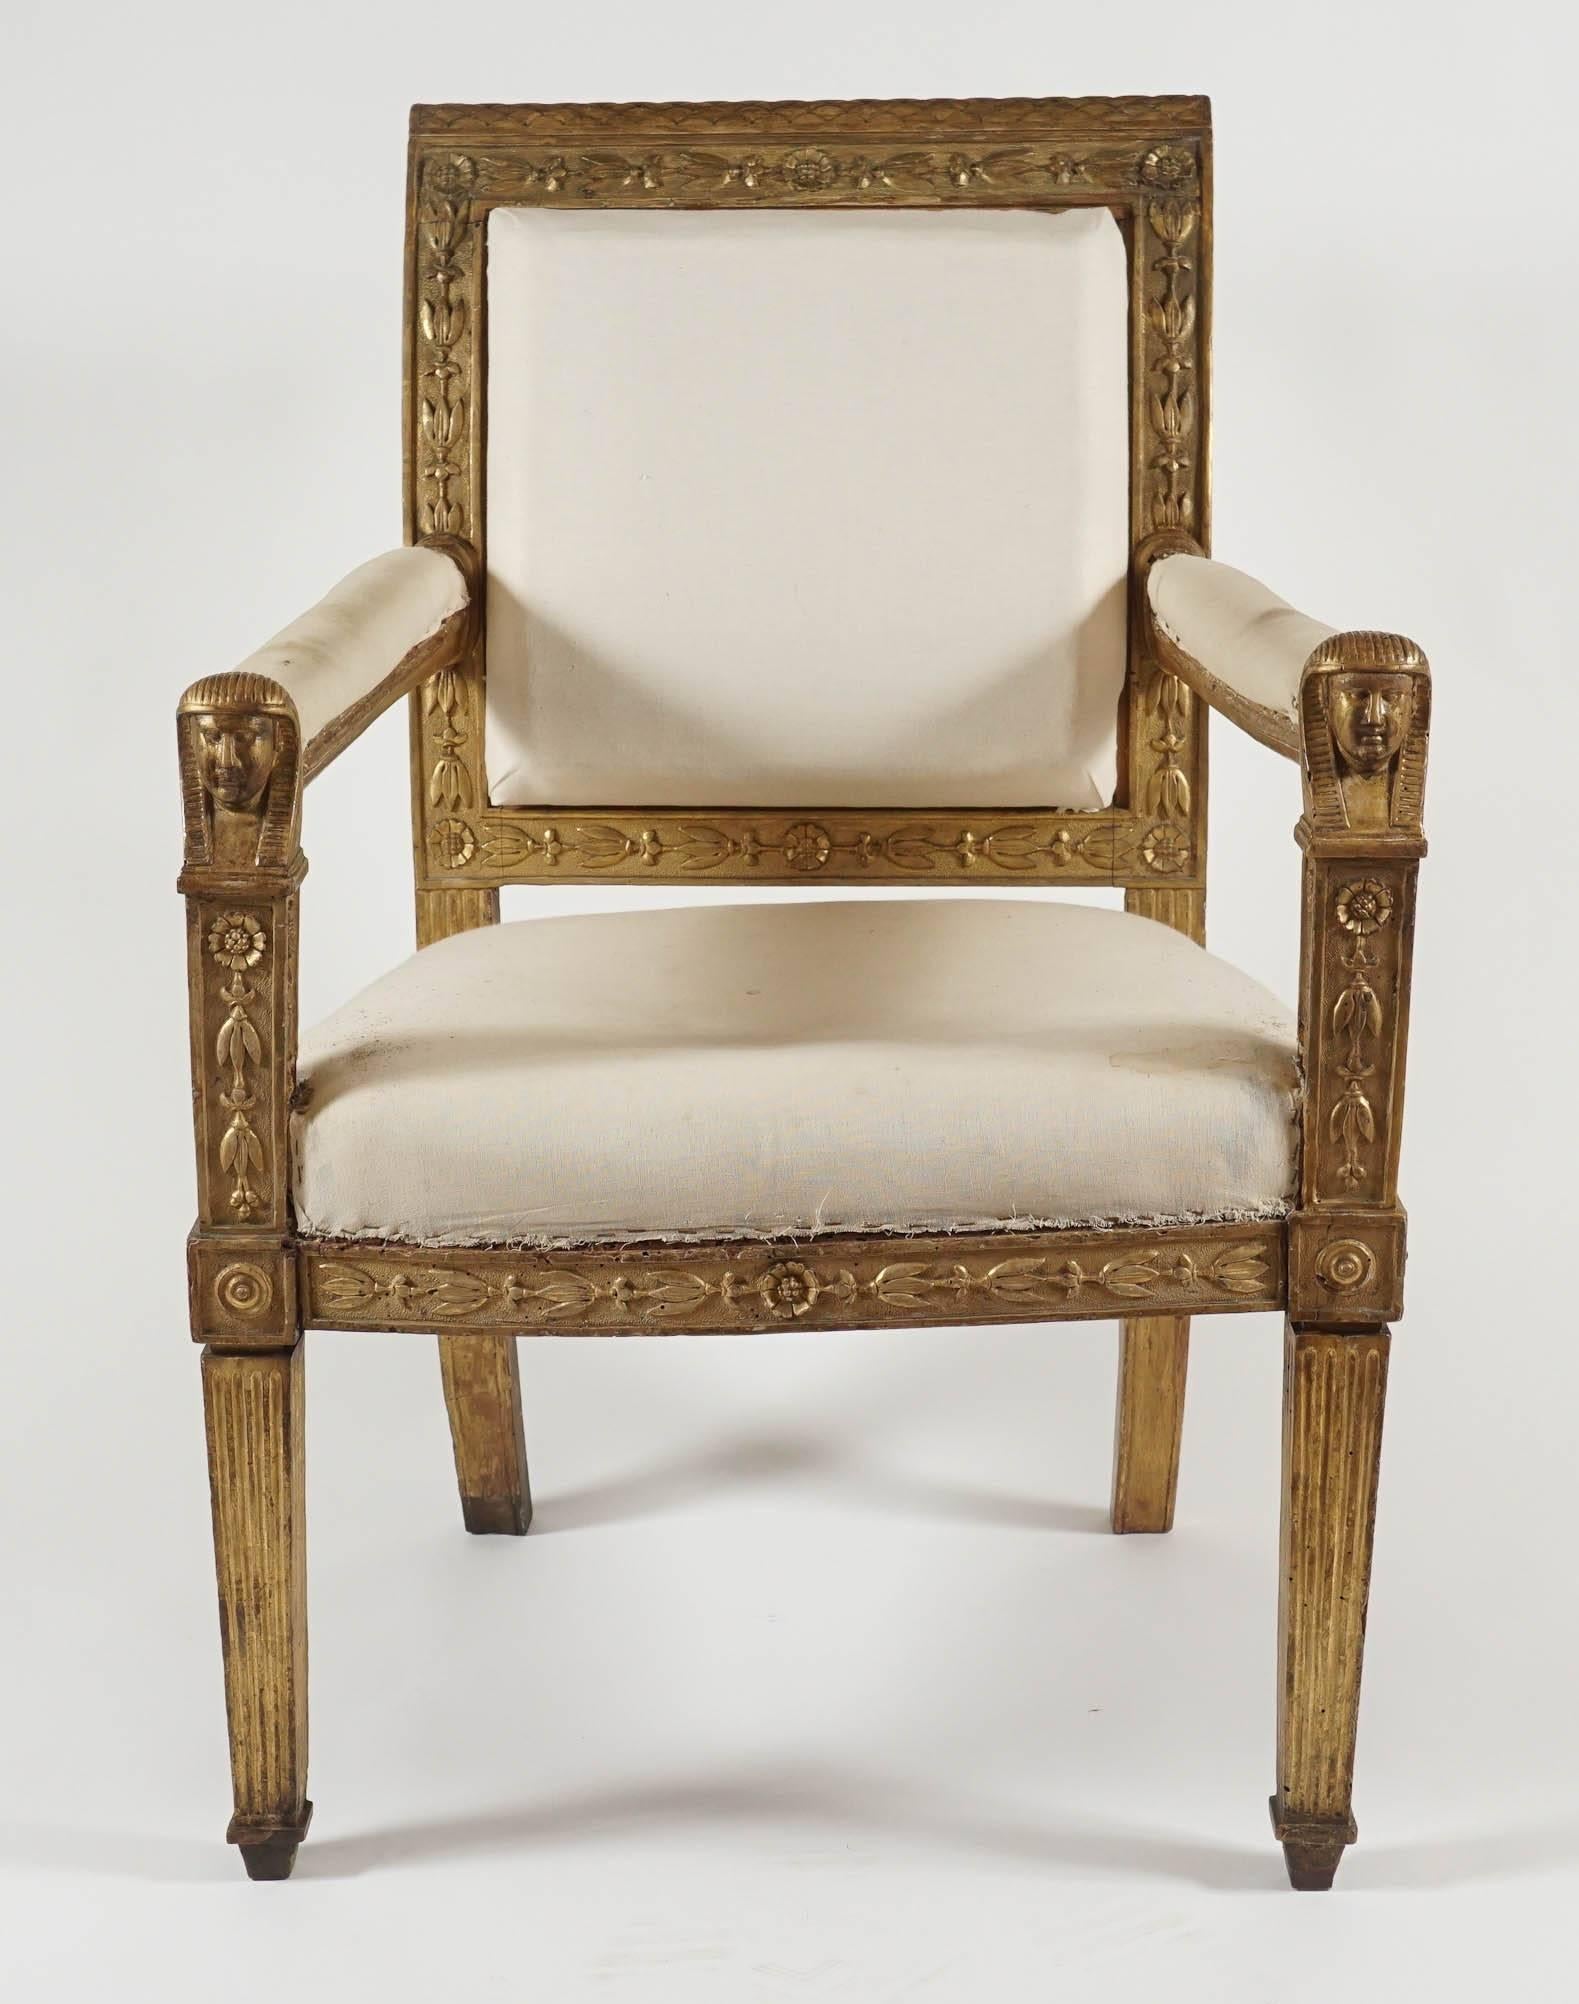 An important Italian giltwood fauteuil of exceptional design and exquisite detail crafted in Naples and attributed to Pietro Galizia, circa 1810, having fish-scale crest-rail and upholstered back with carved honey-suckle and flower border joining